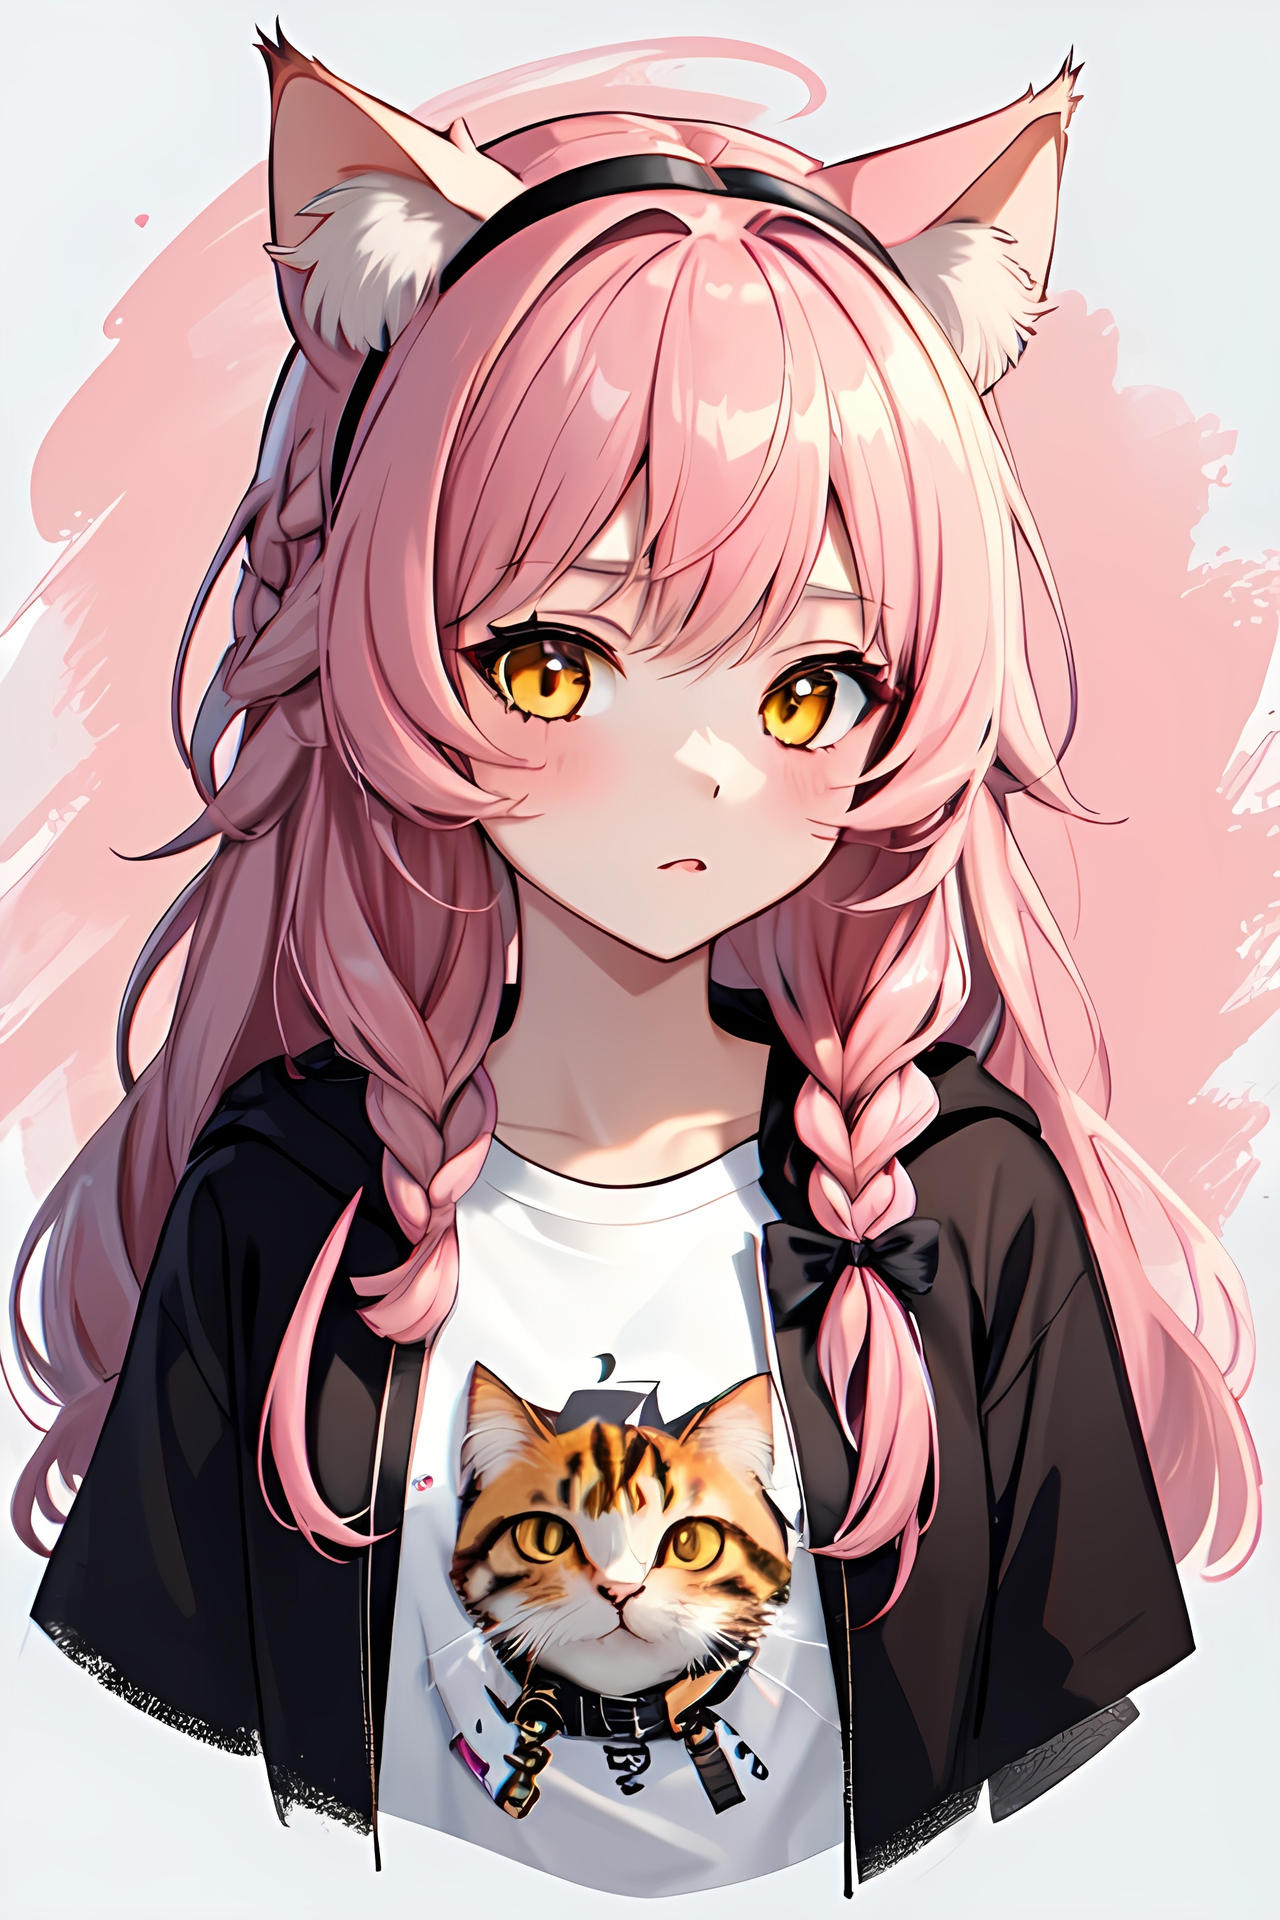 Anime girl with cat ears by InstaAi on DeviantArt